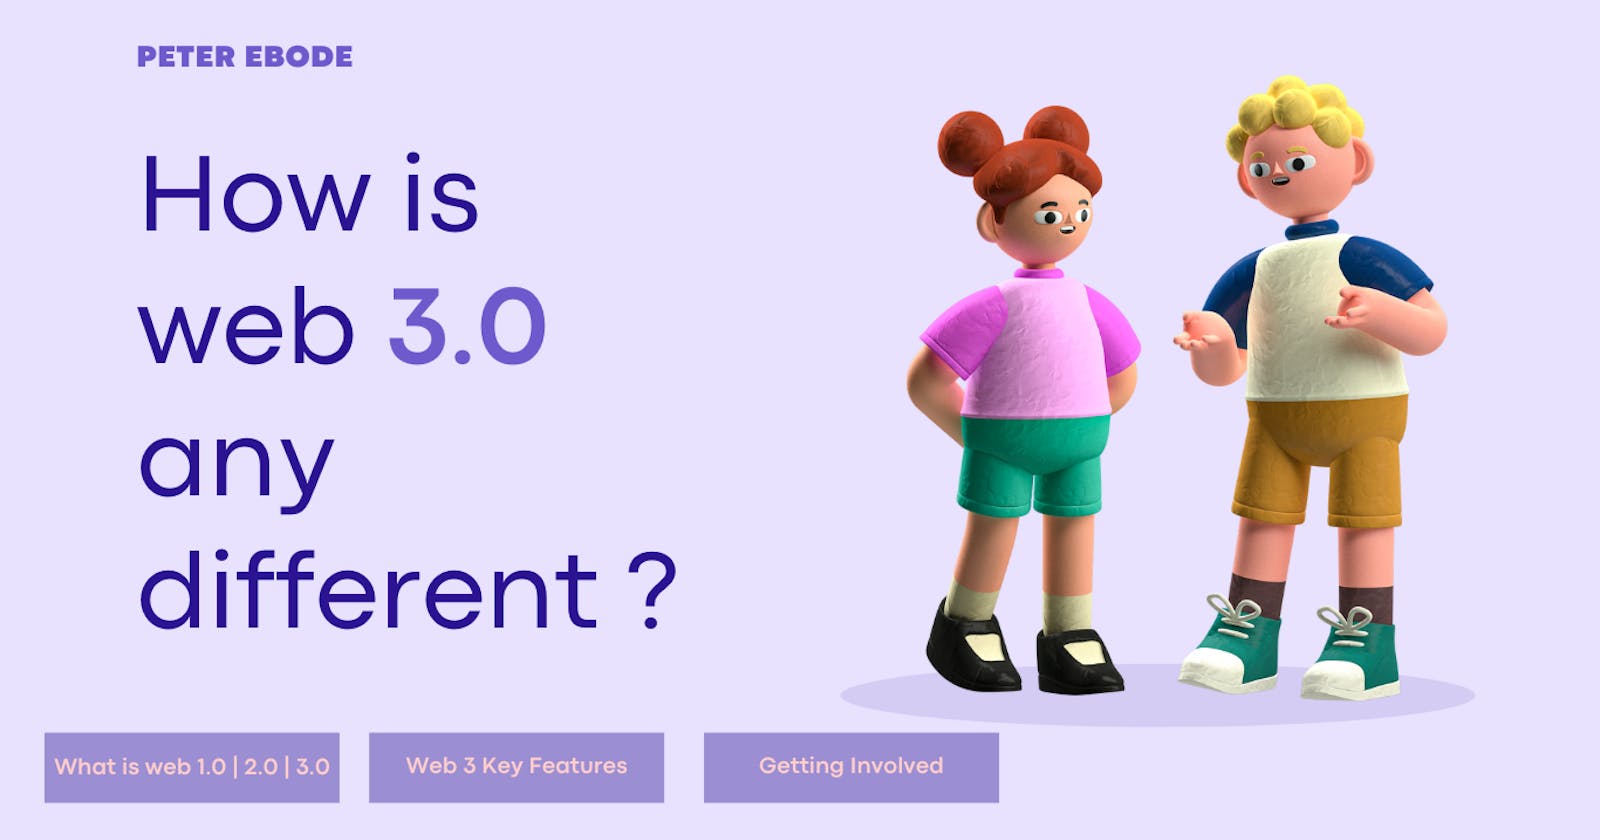 How Is Web 3.0 Any Different?